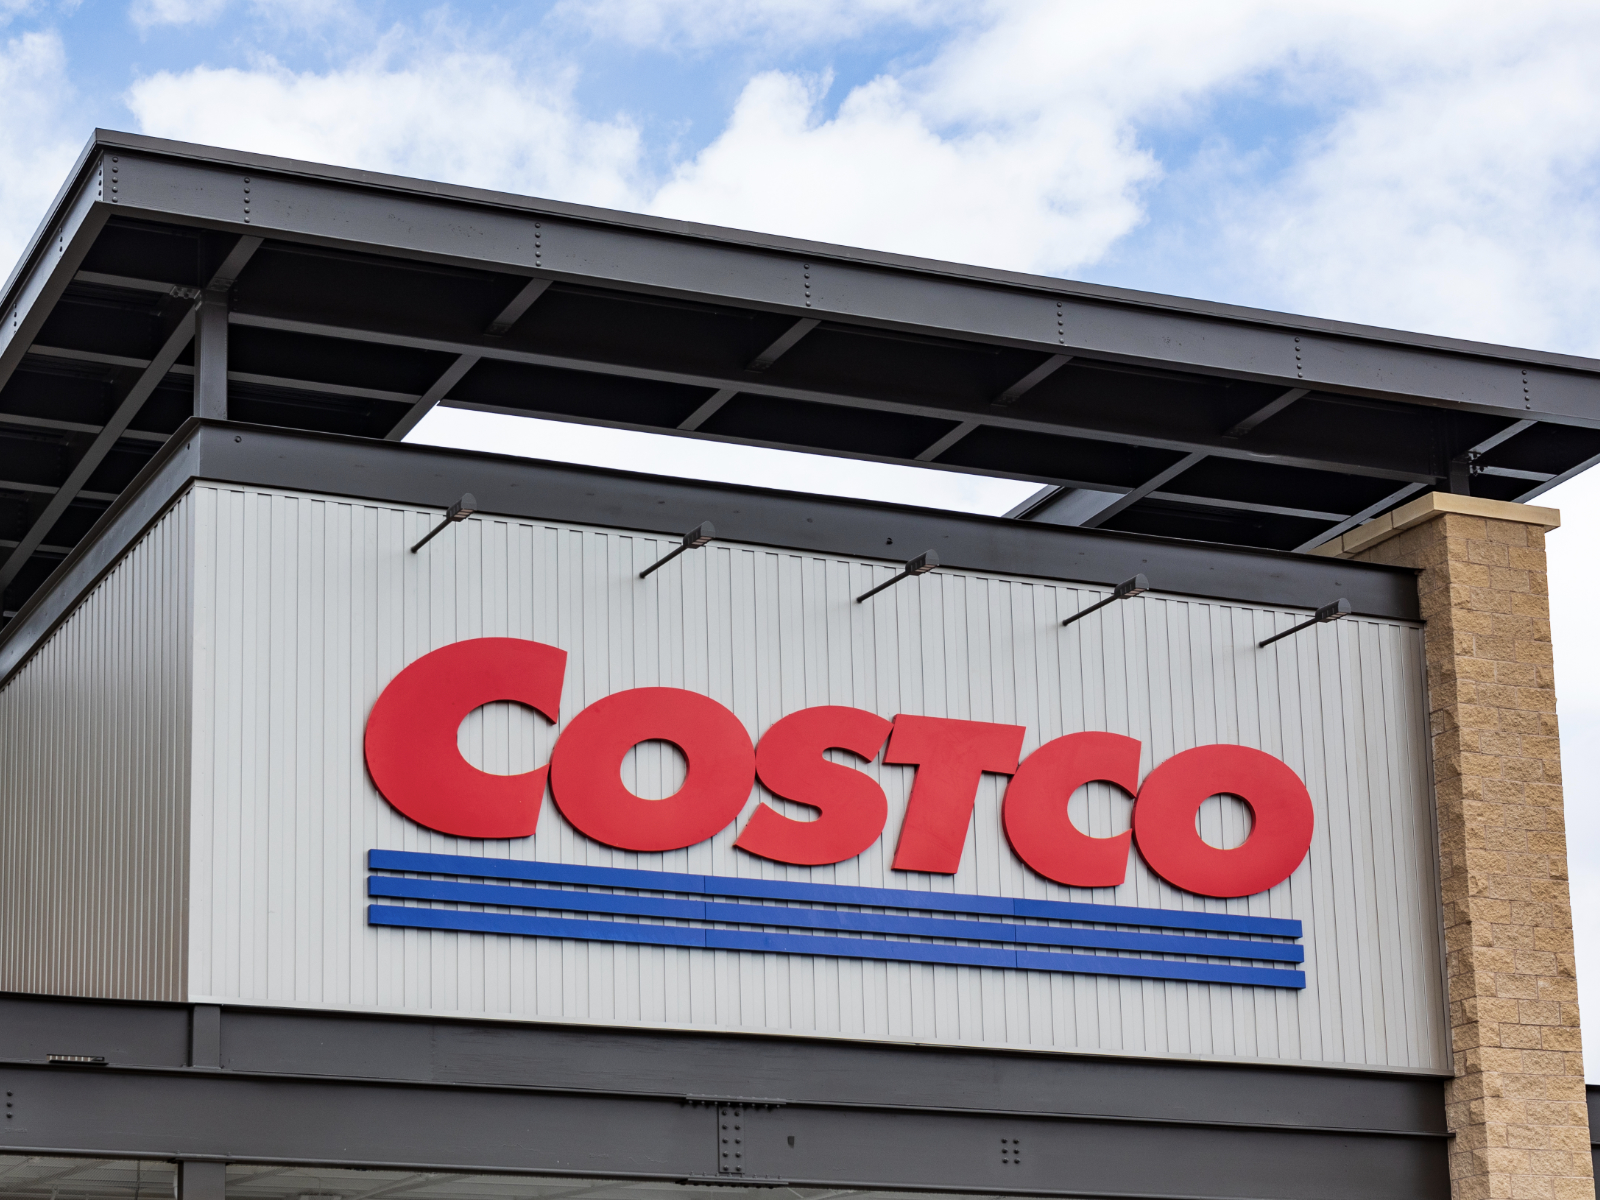 costco sign outside the store